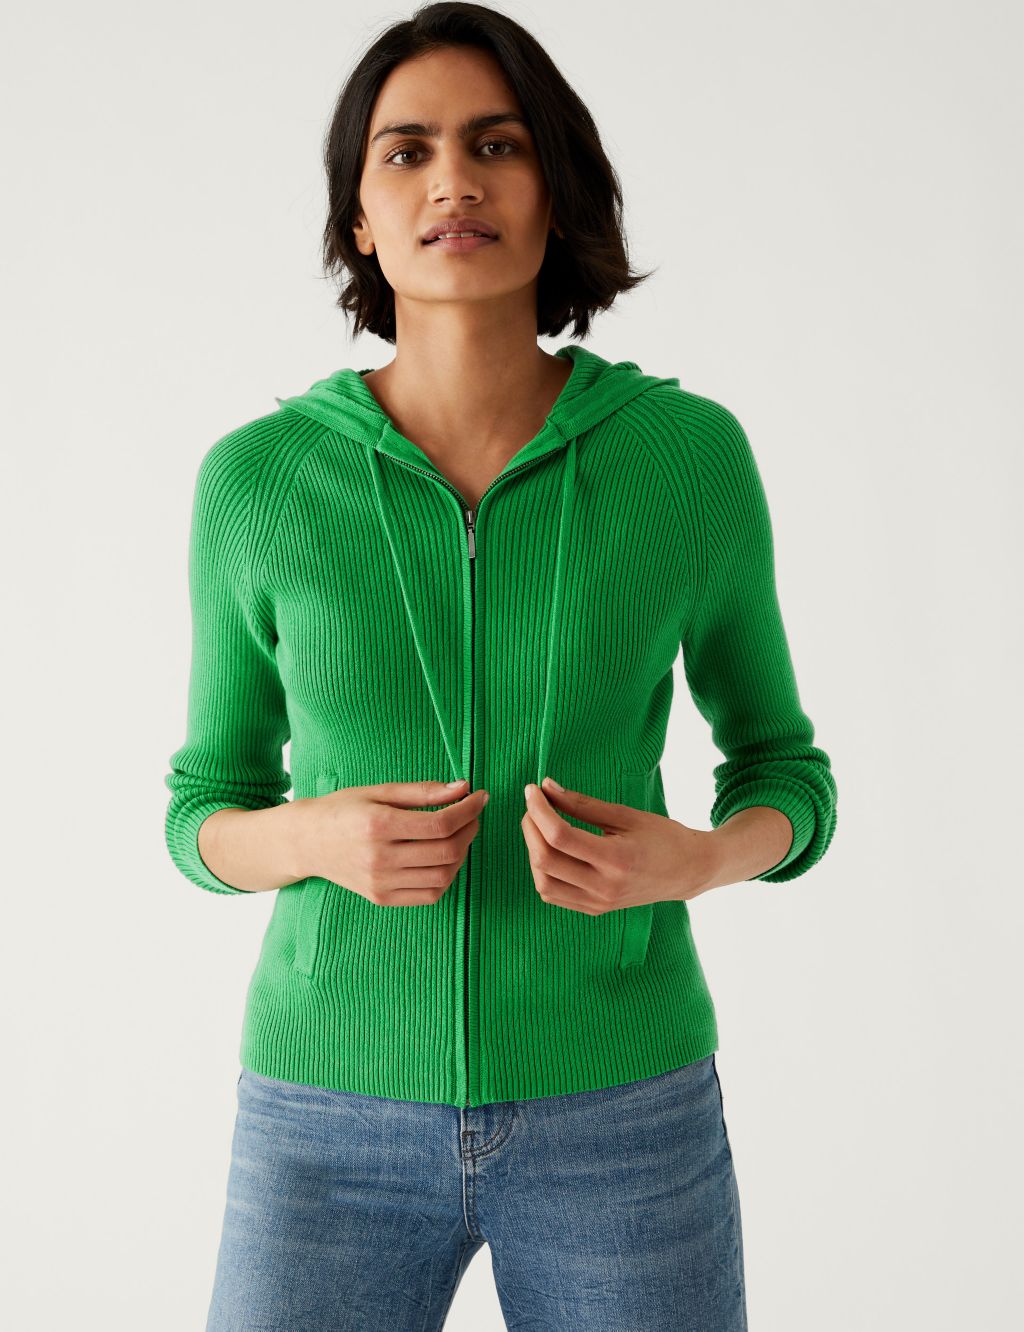 Cotton Rich Ribbed Hoodie image 1